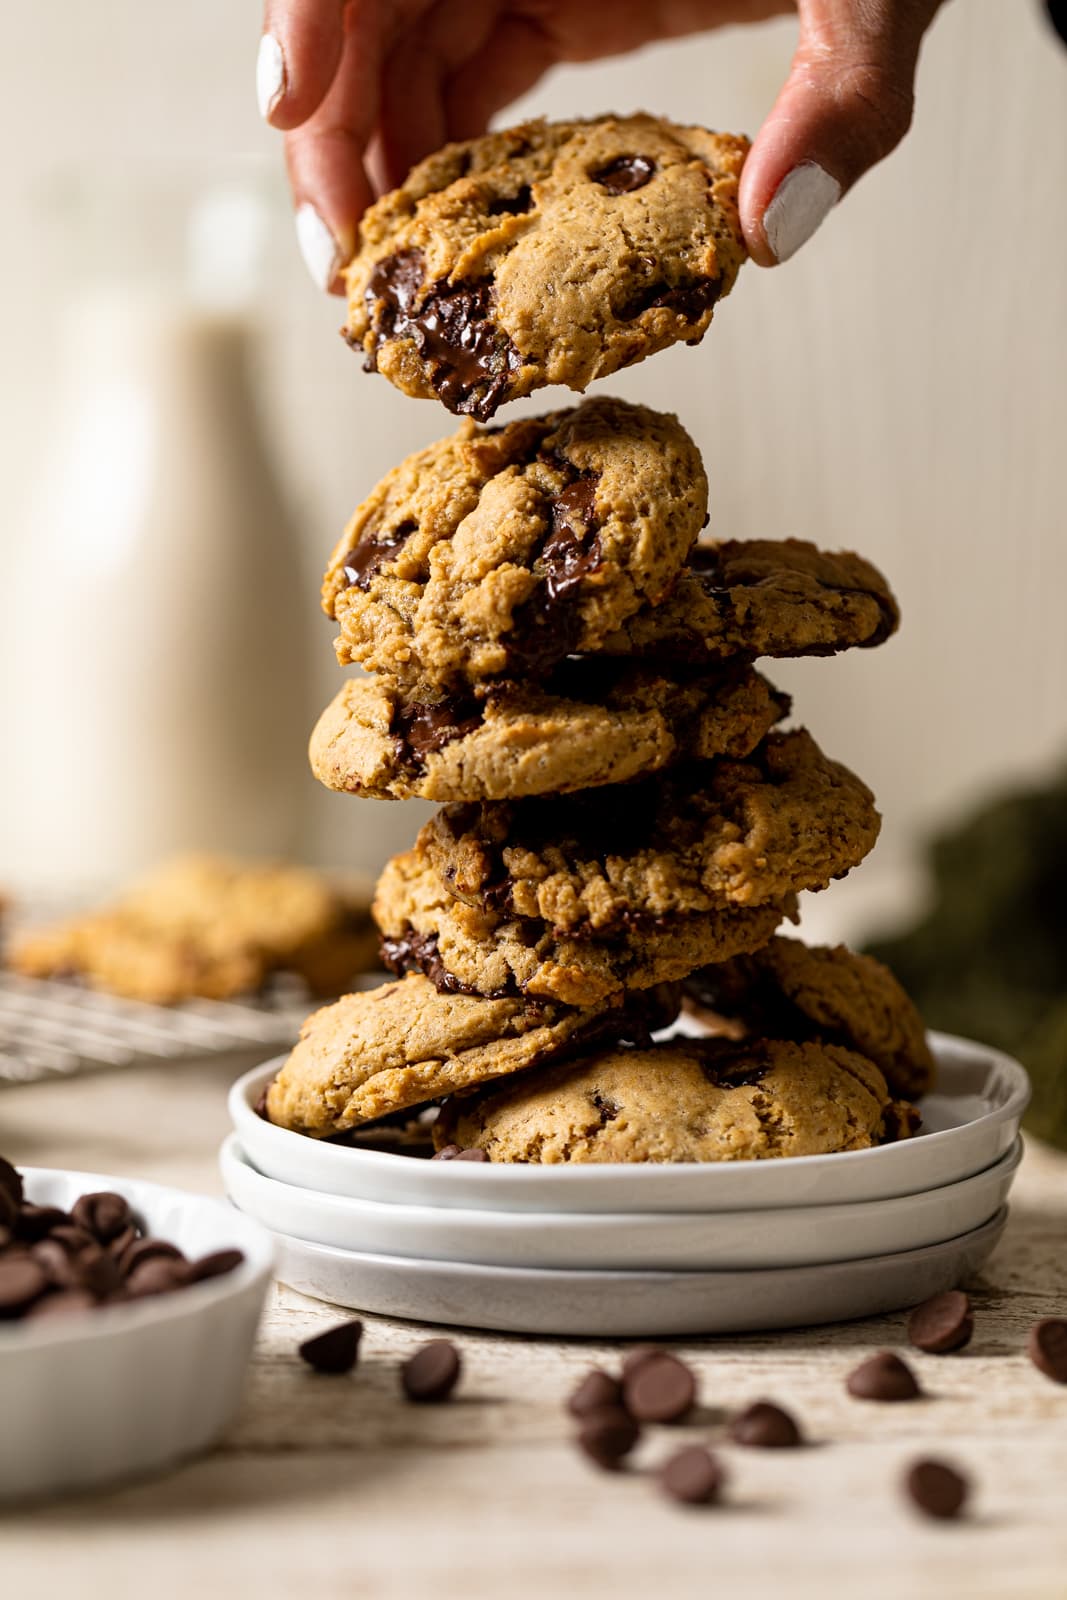 Hand grabbing a Vegan Chocolate Chip Cookie from a tall stack